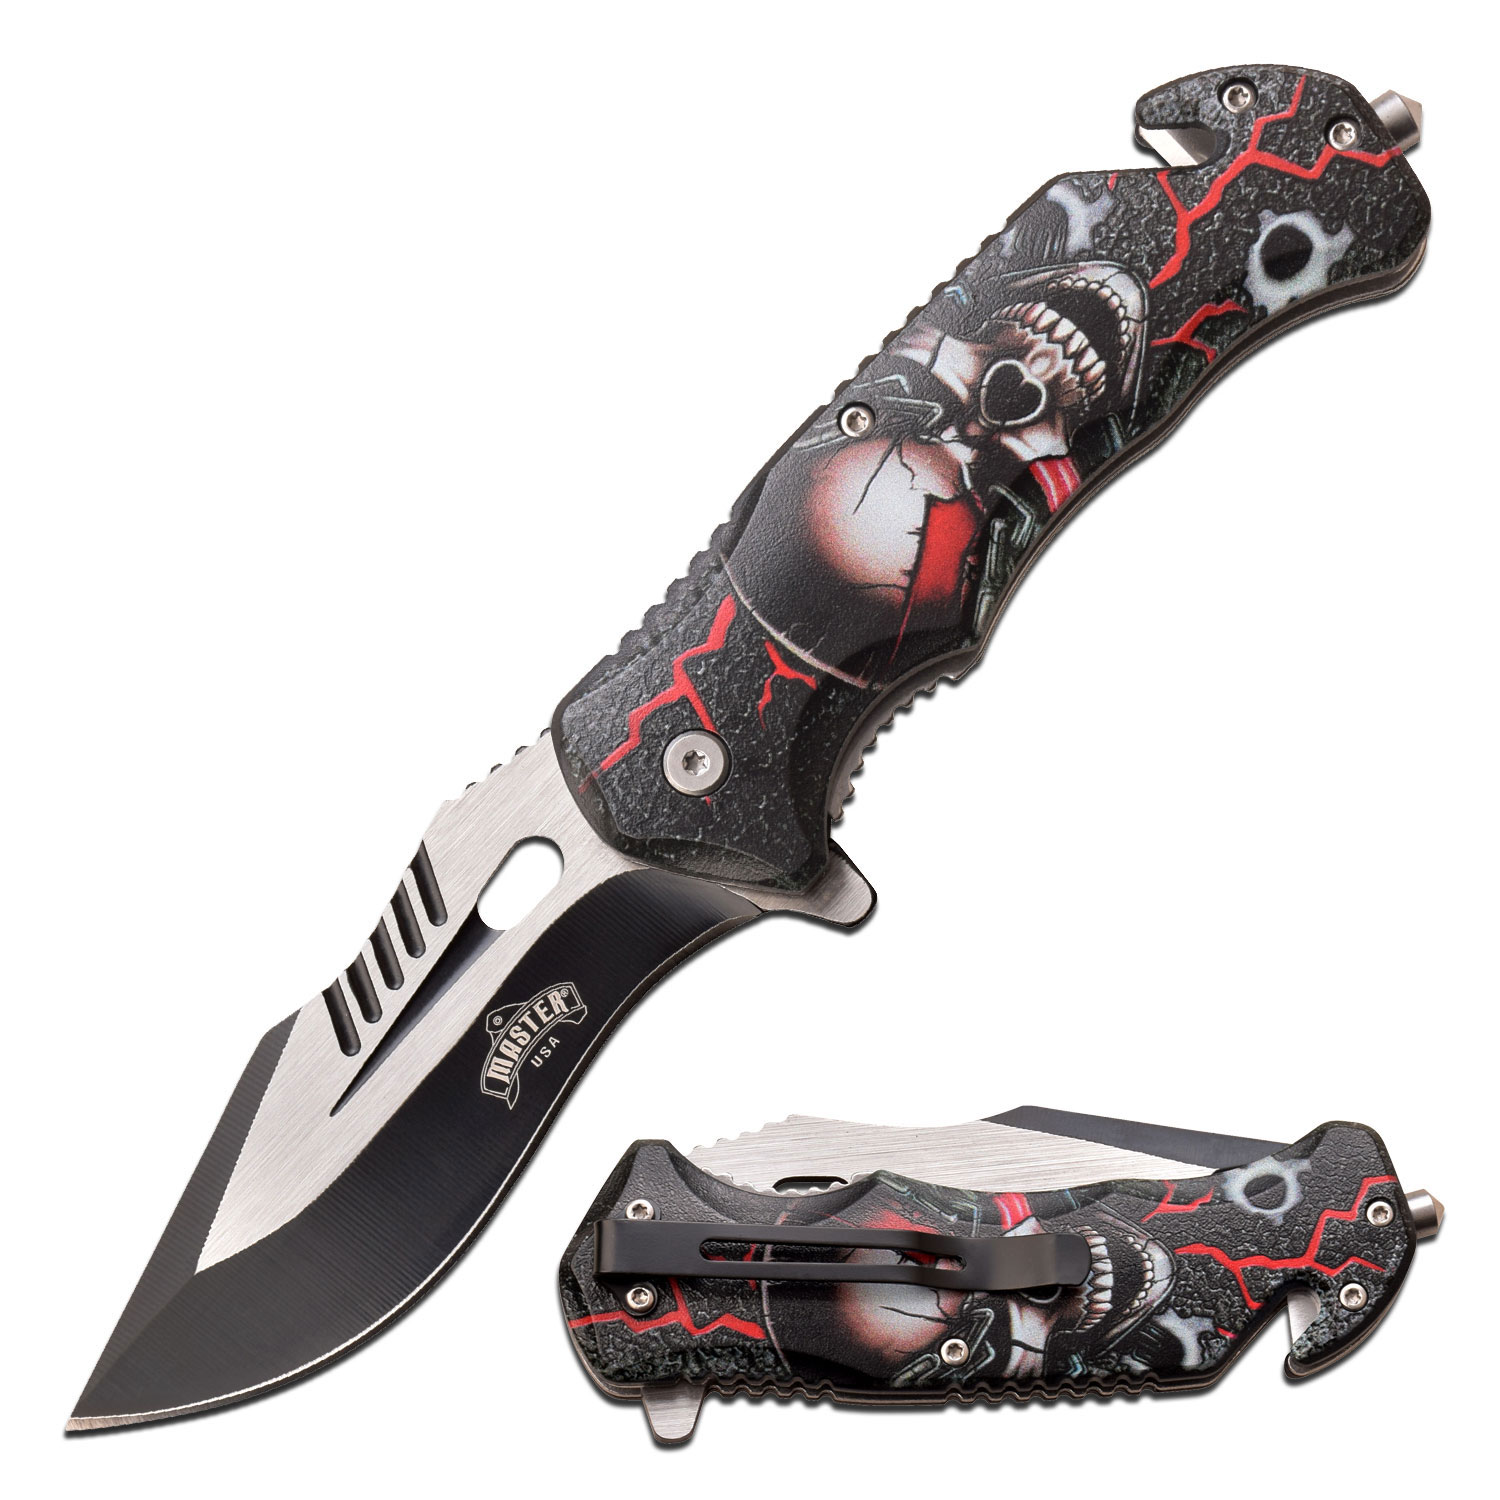 Spring-Assist Folding Knife 3.75in Black Blade Tactical EDC Rescue Red Skull